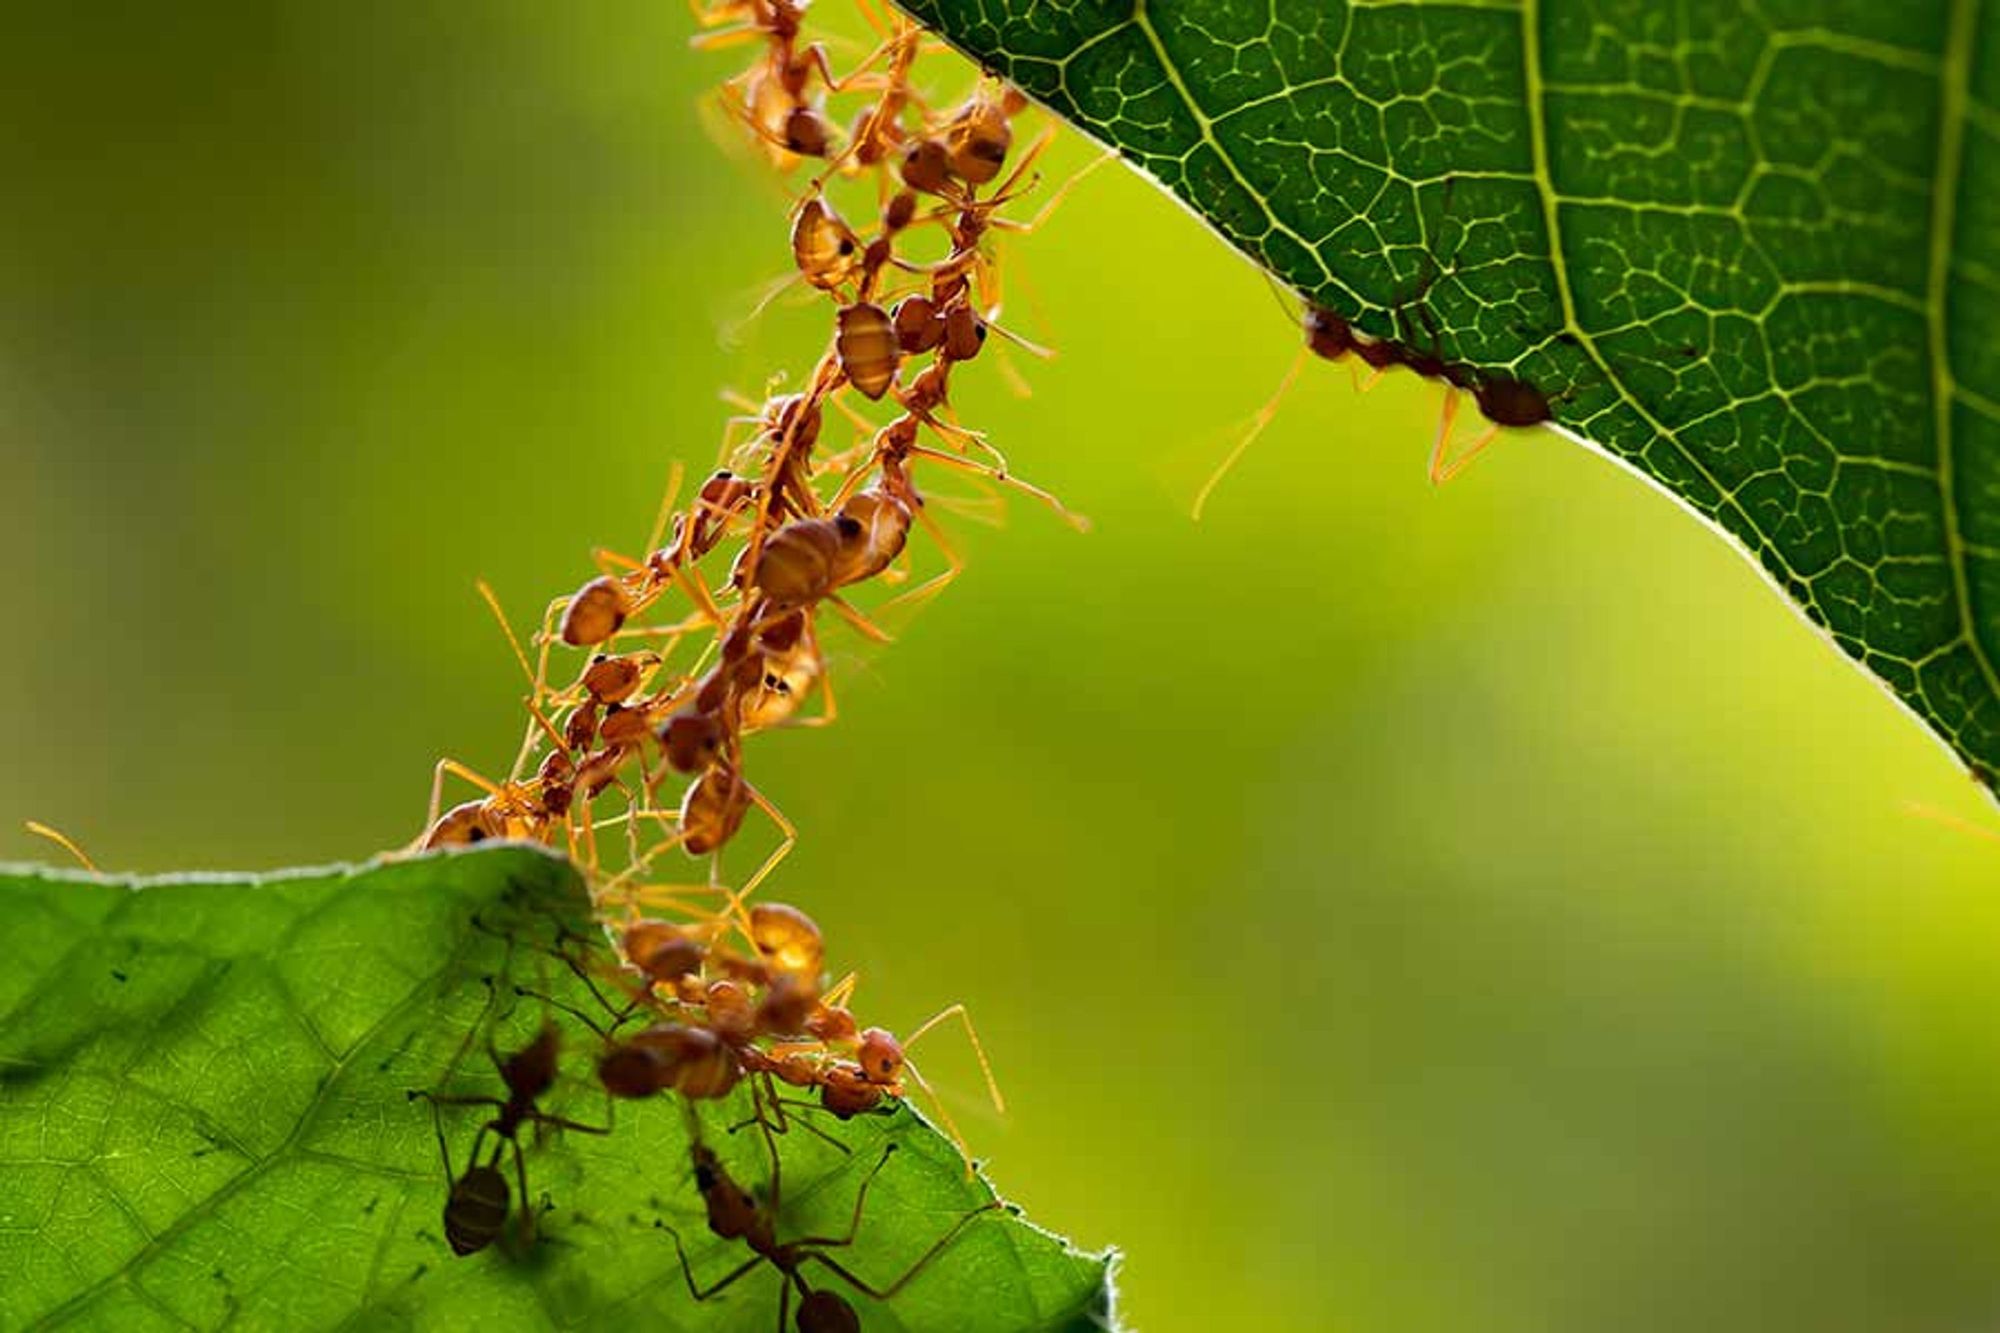 ants looking like a collective organism moving between two leaves